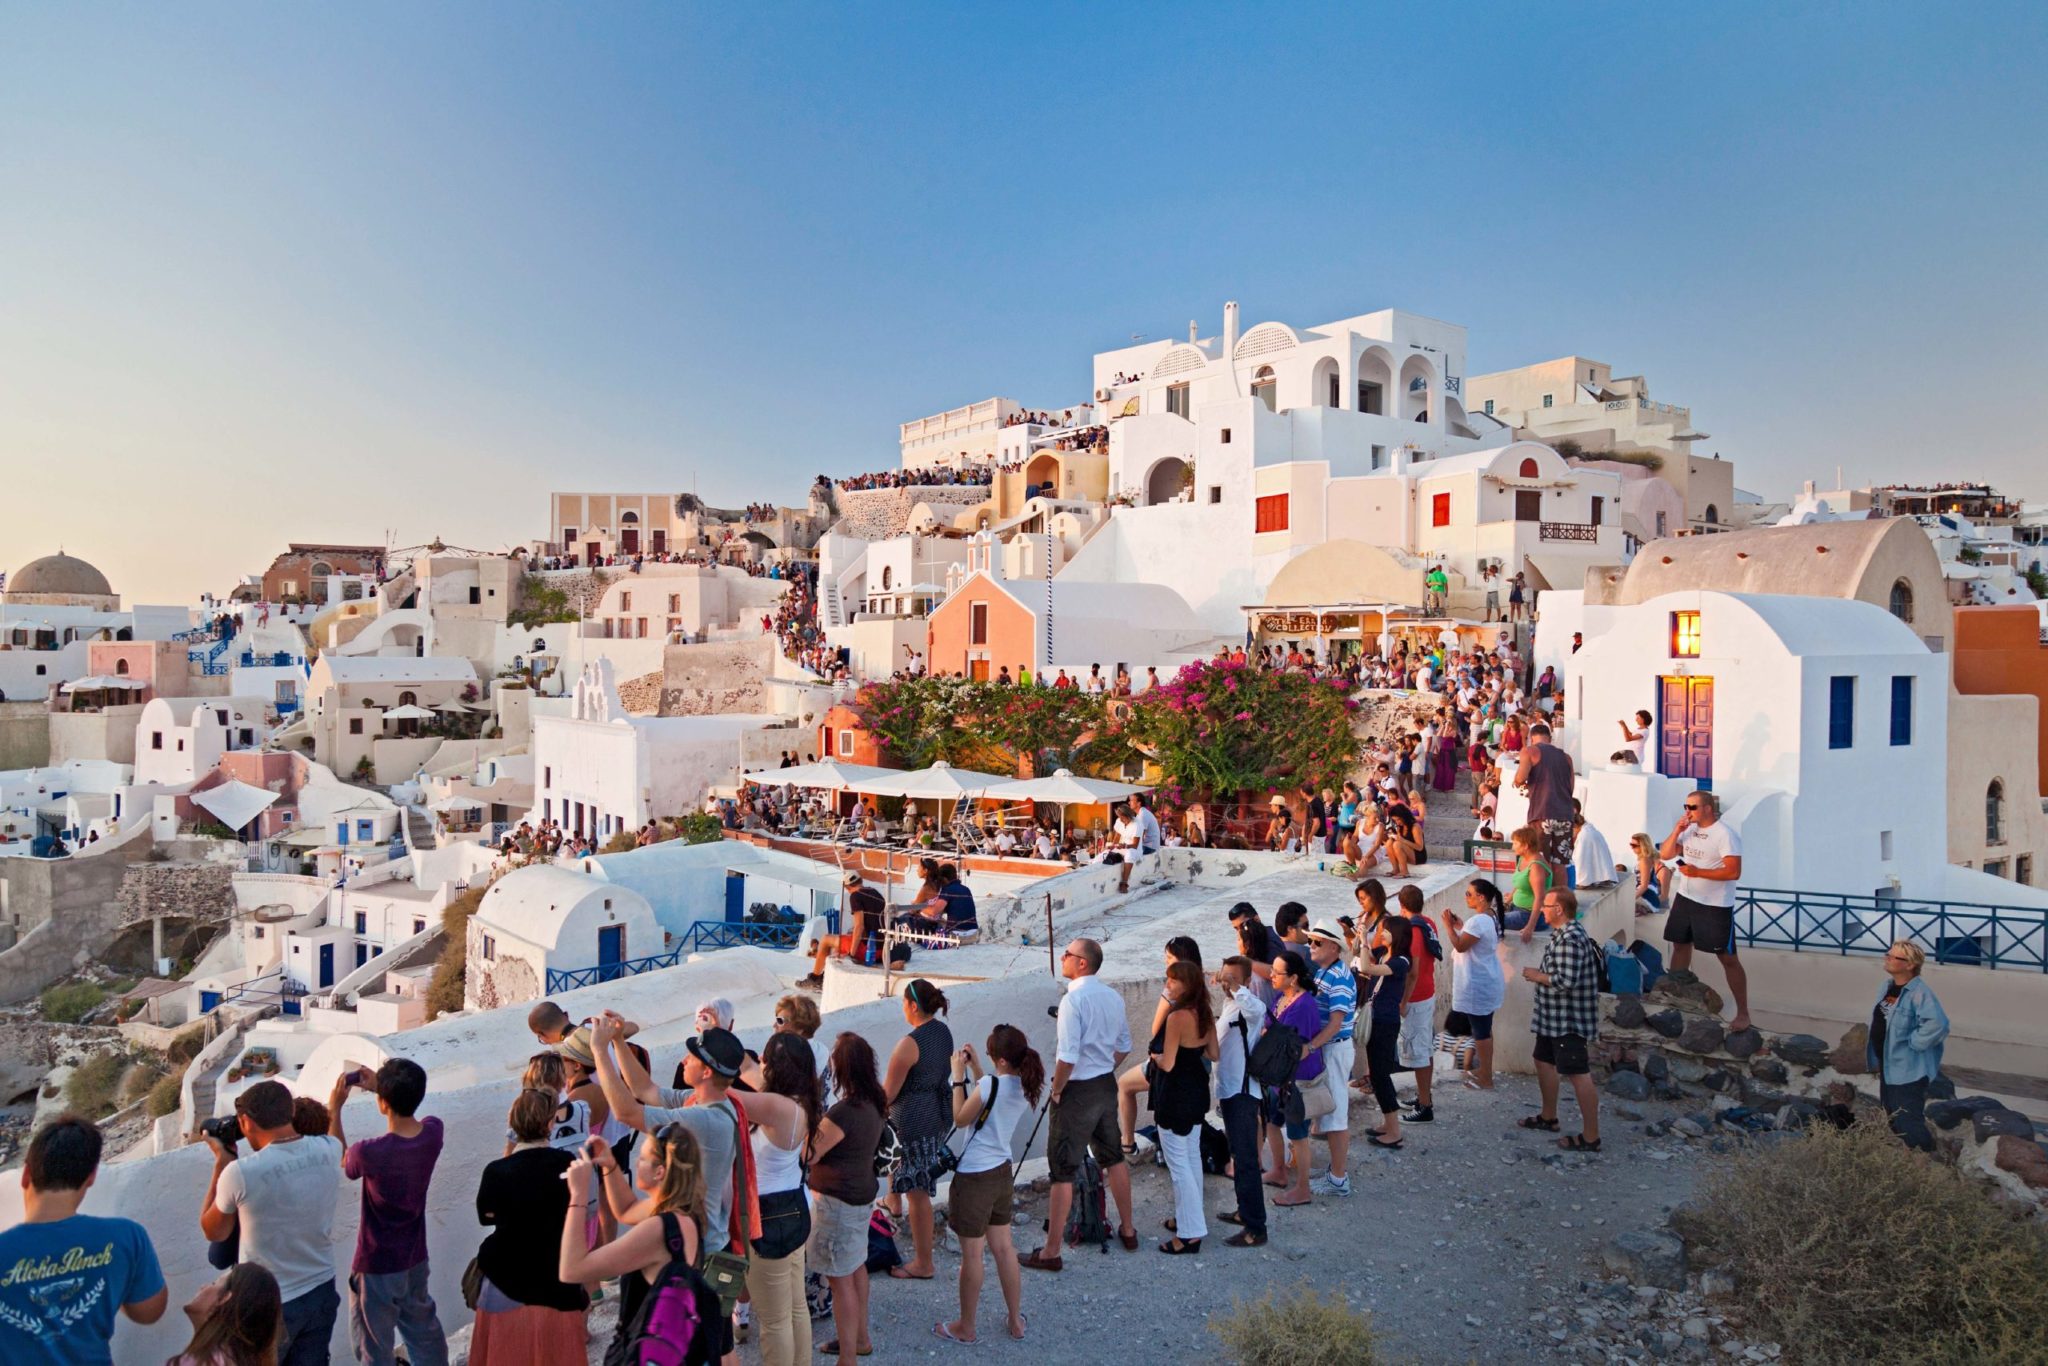 People lined up to watch the sun set in Greece.